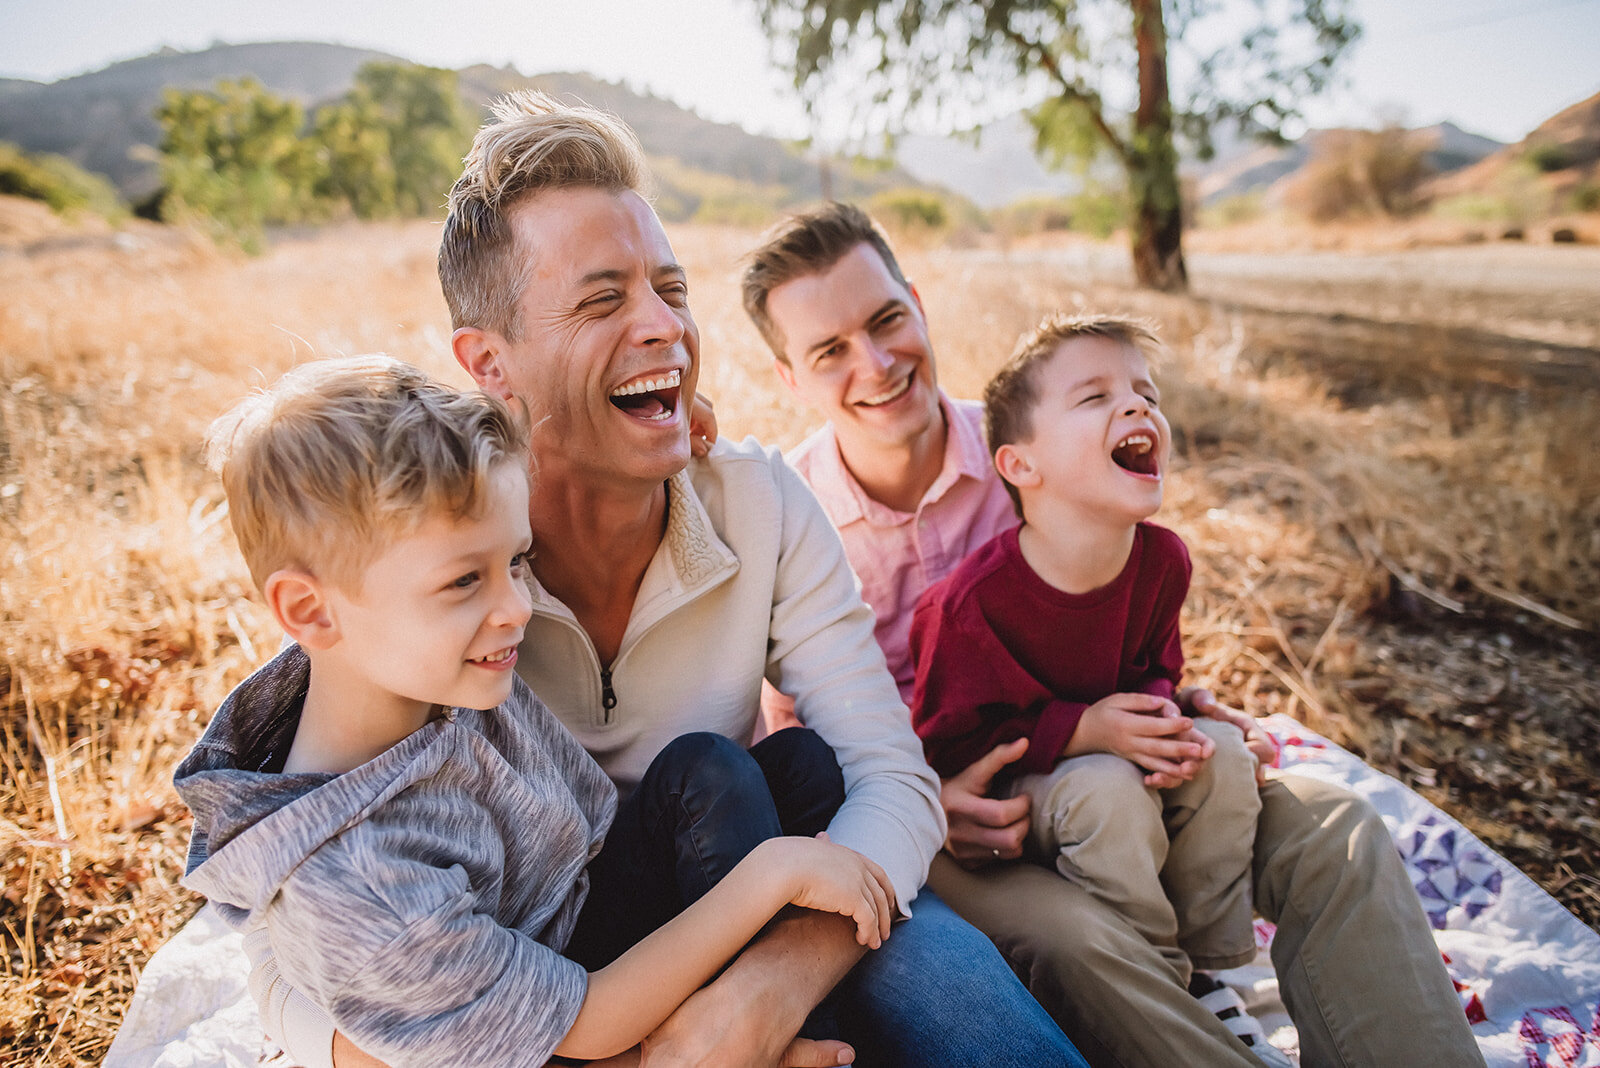 los angeles lgbt family laughing together